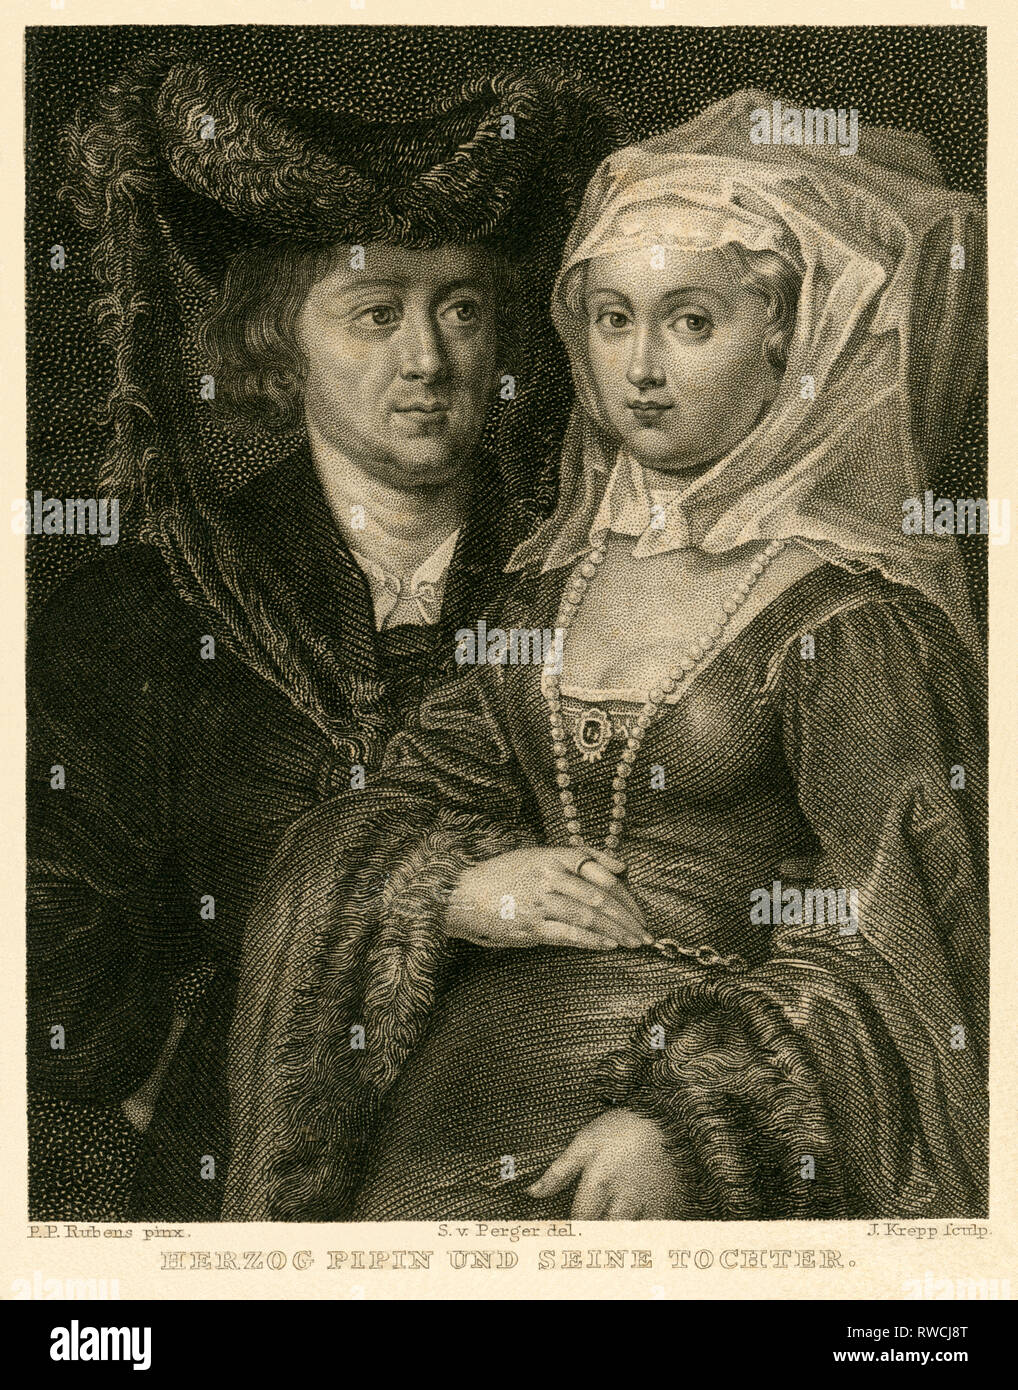 Duke Pepin of Brabant and his daughter, steel engraving, painted by P. P. Rubens, drawing by Perger, engraving by Krepp  around 1840th., Artist's Copyright has not to be cleared Stock Photo